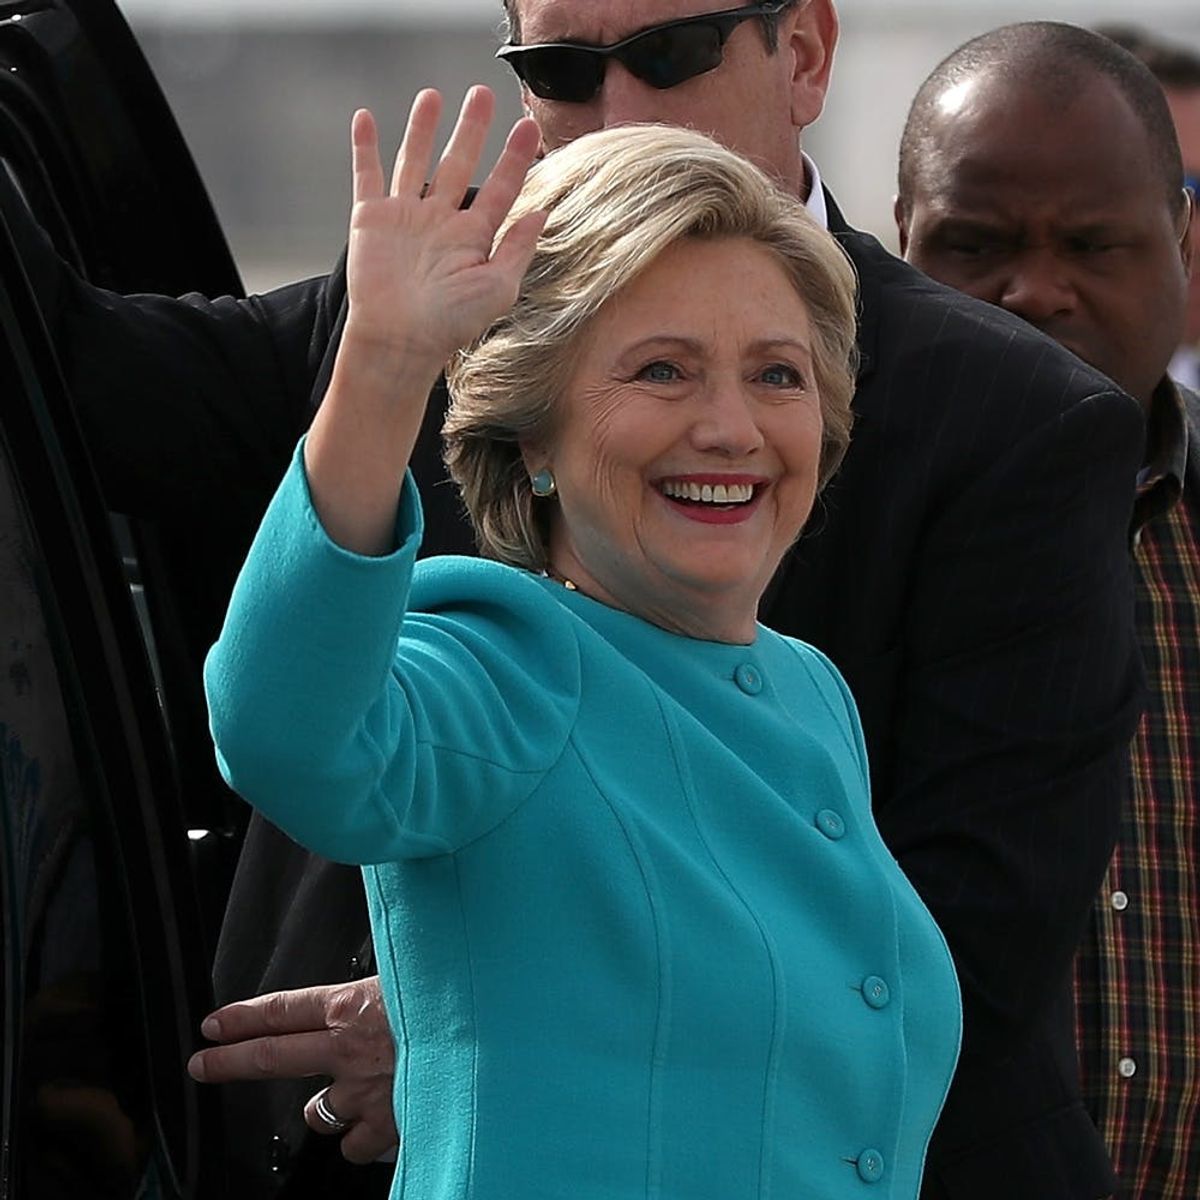 Here’s Everything You Need to Know About Those New Hillary Clinton Server Emails